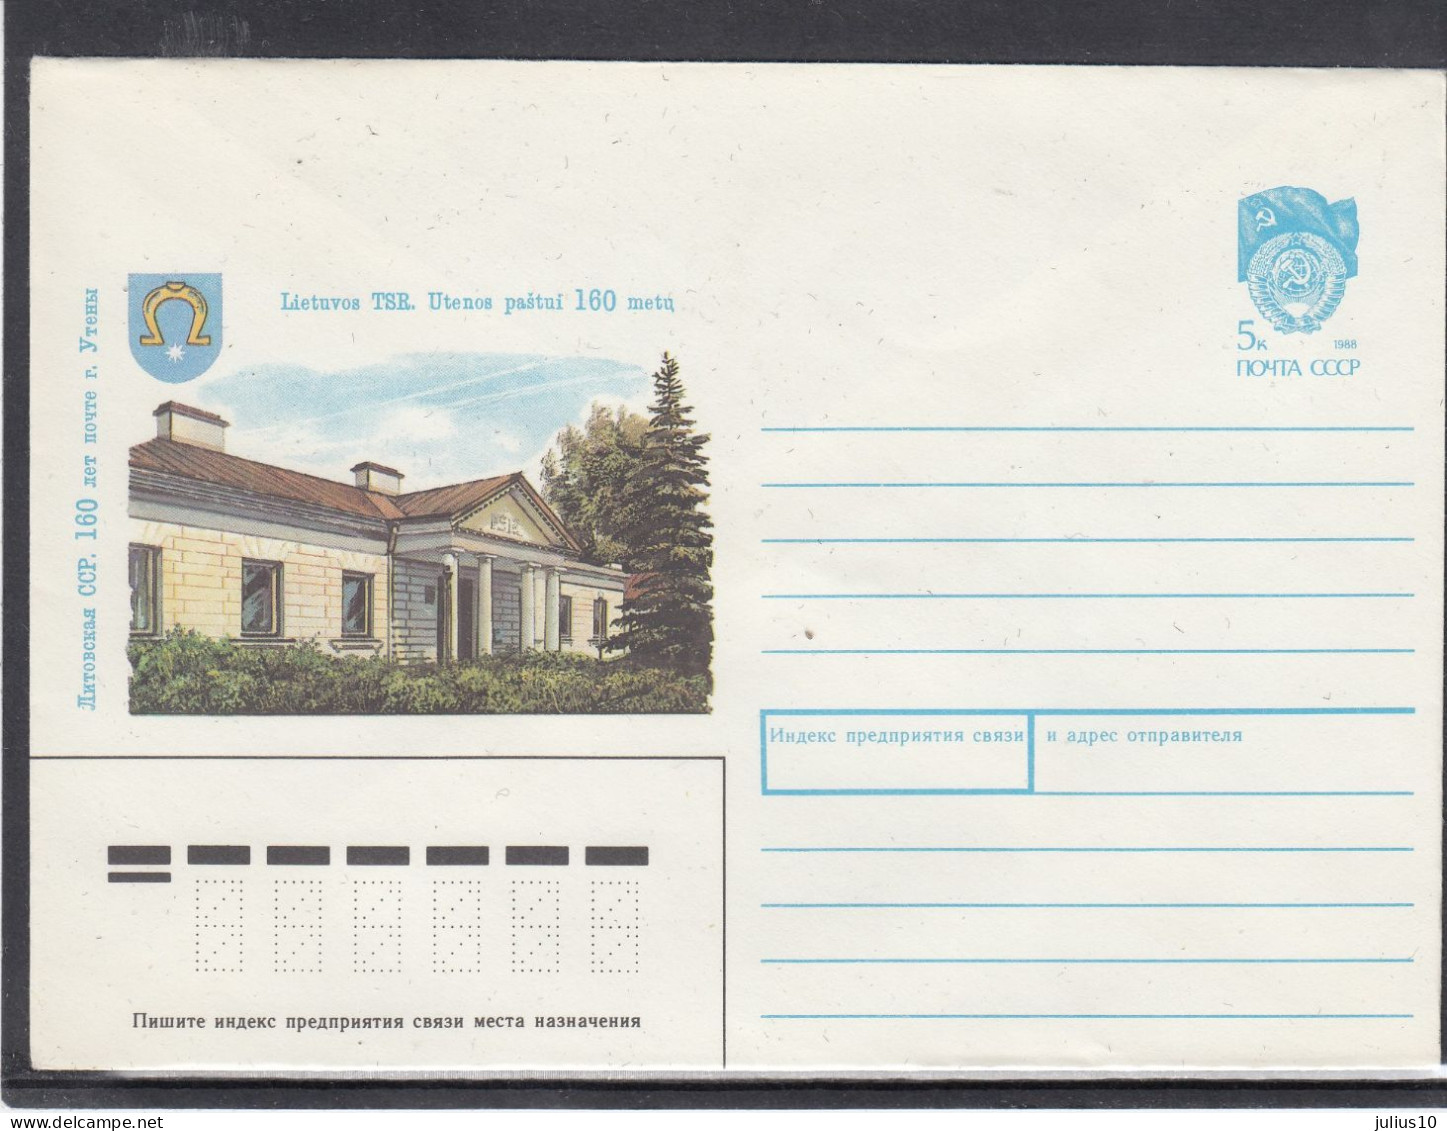 LITHUANIA (USSR) 1990 Cover Utena Coat Of Arms Post #LTV198 - Lithuania